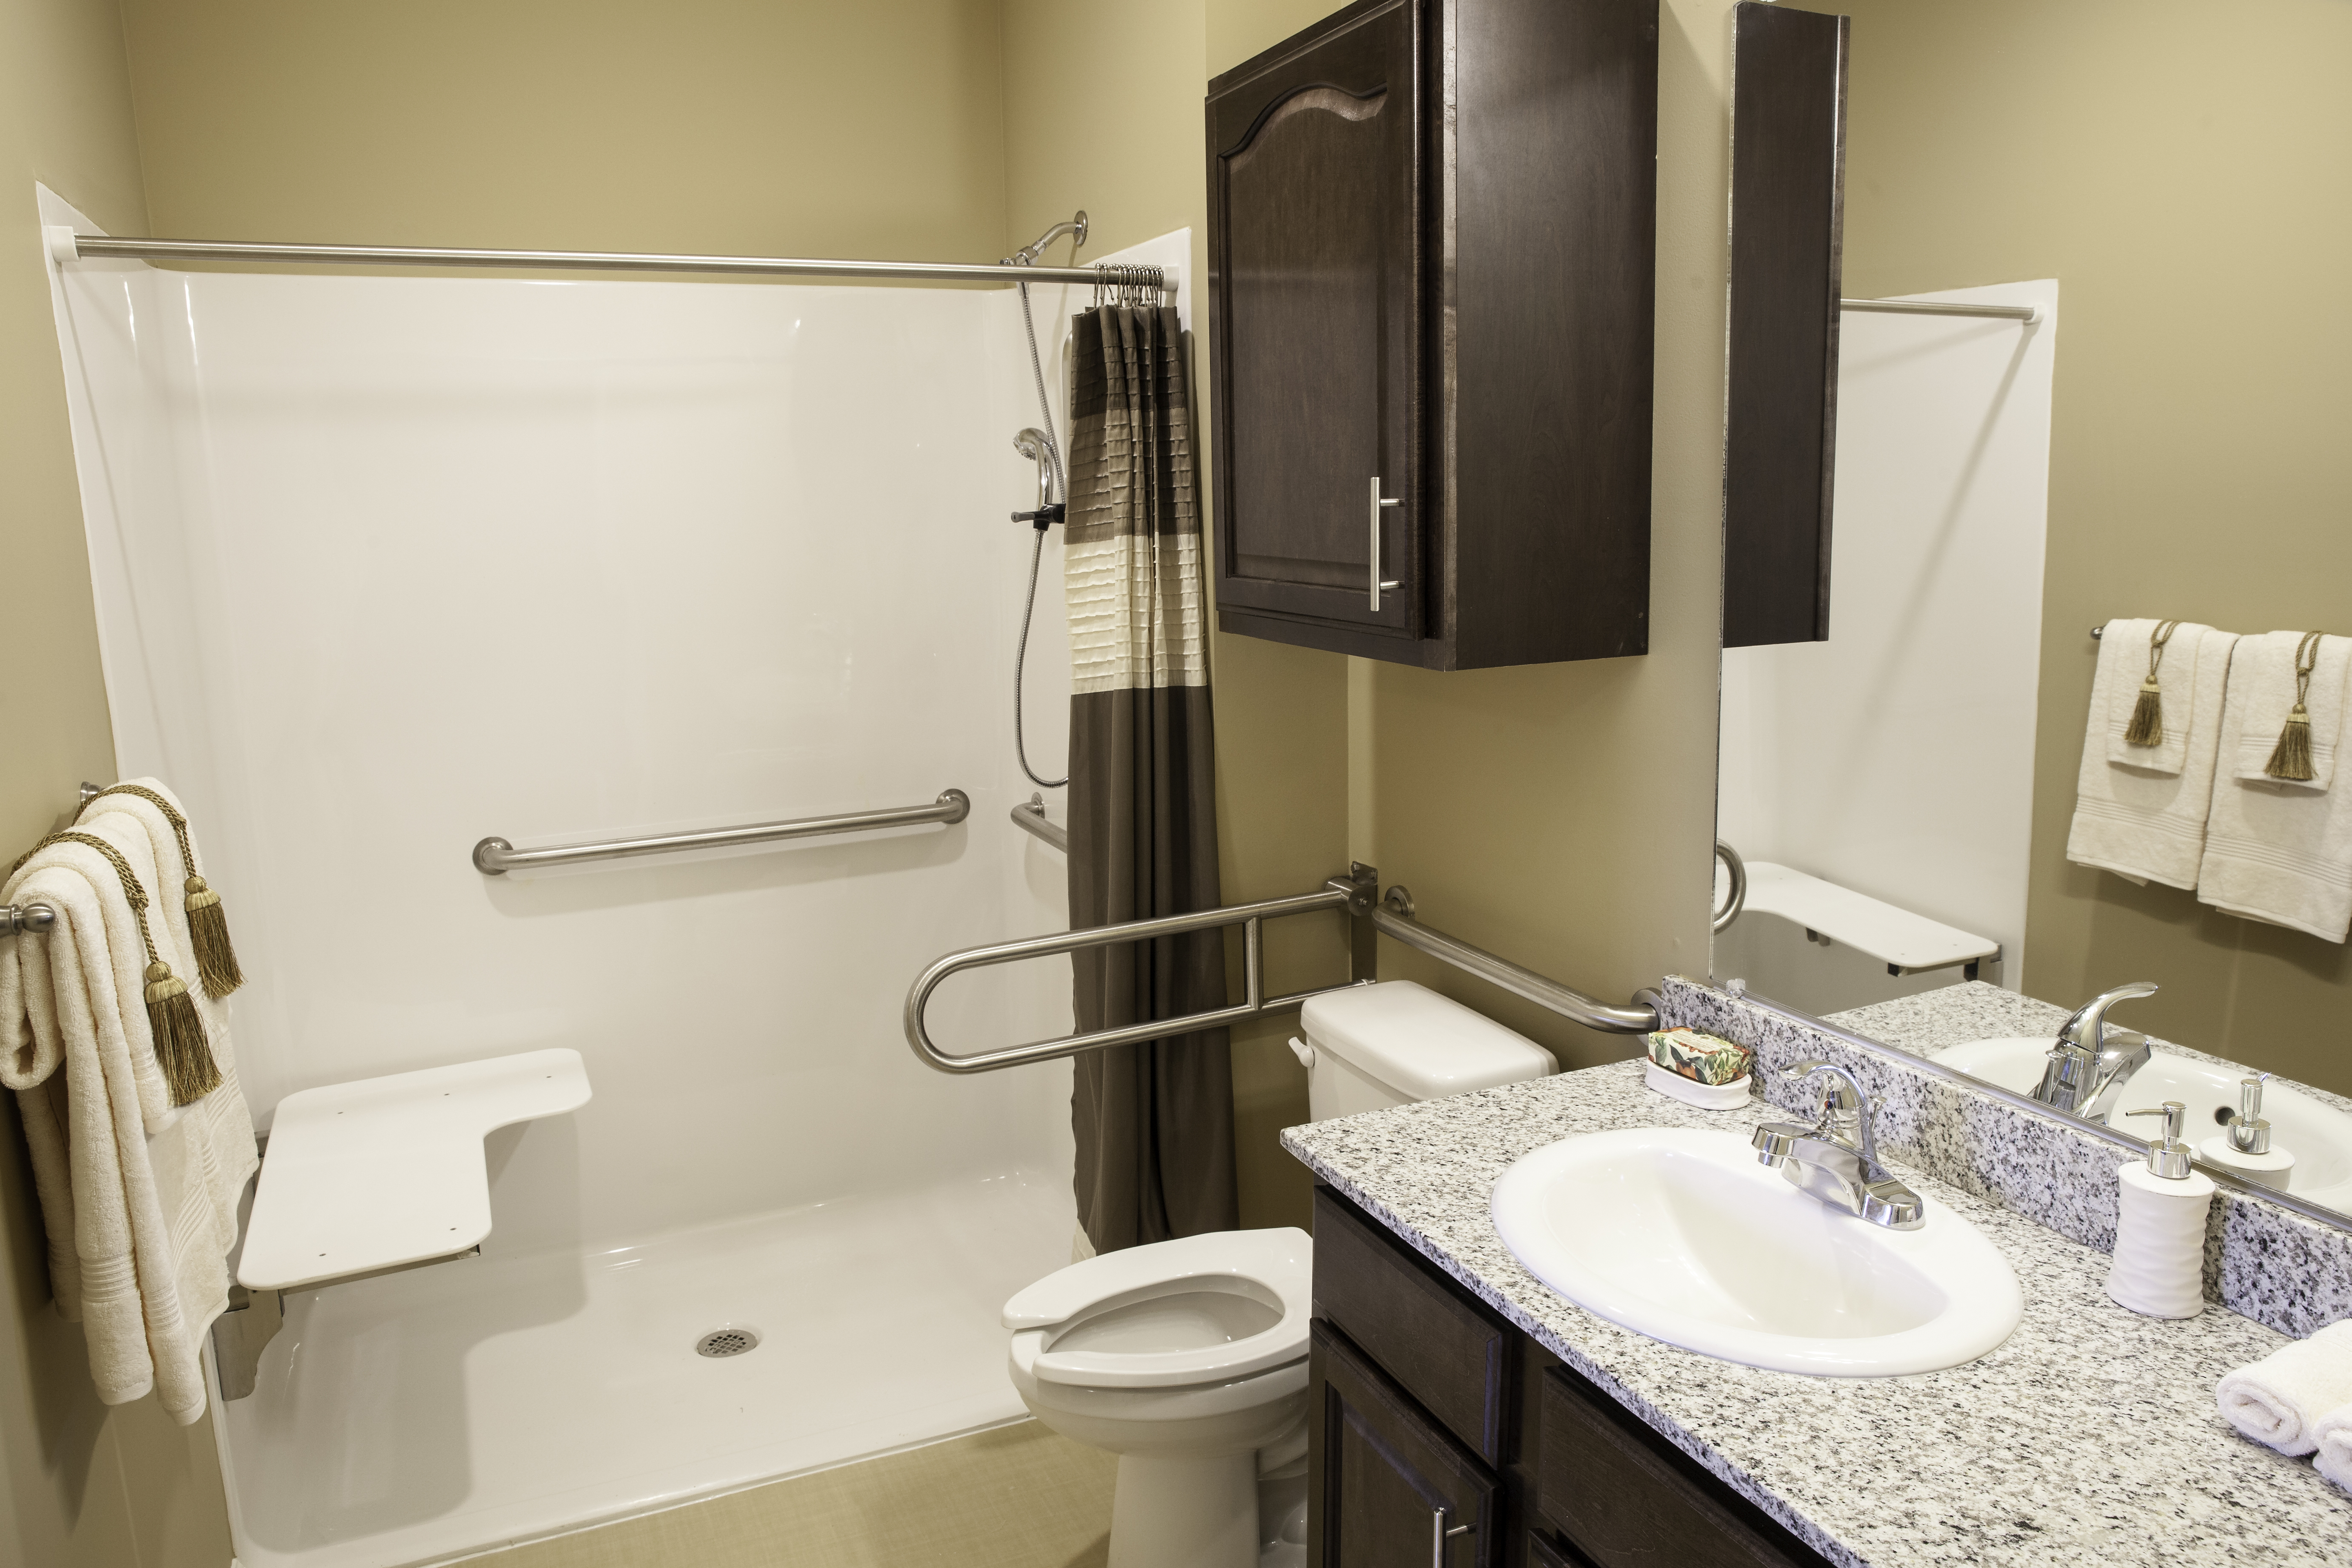 Aspen of Brookhaven Room Features: single and double occupancy suites